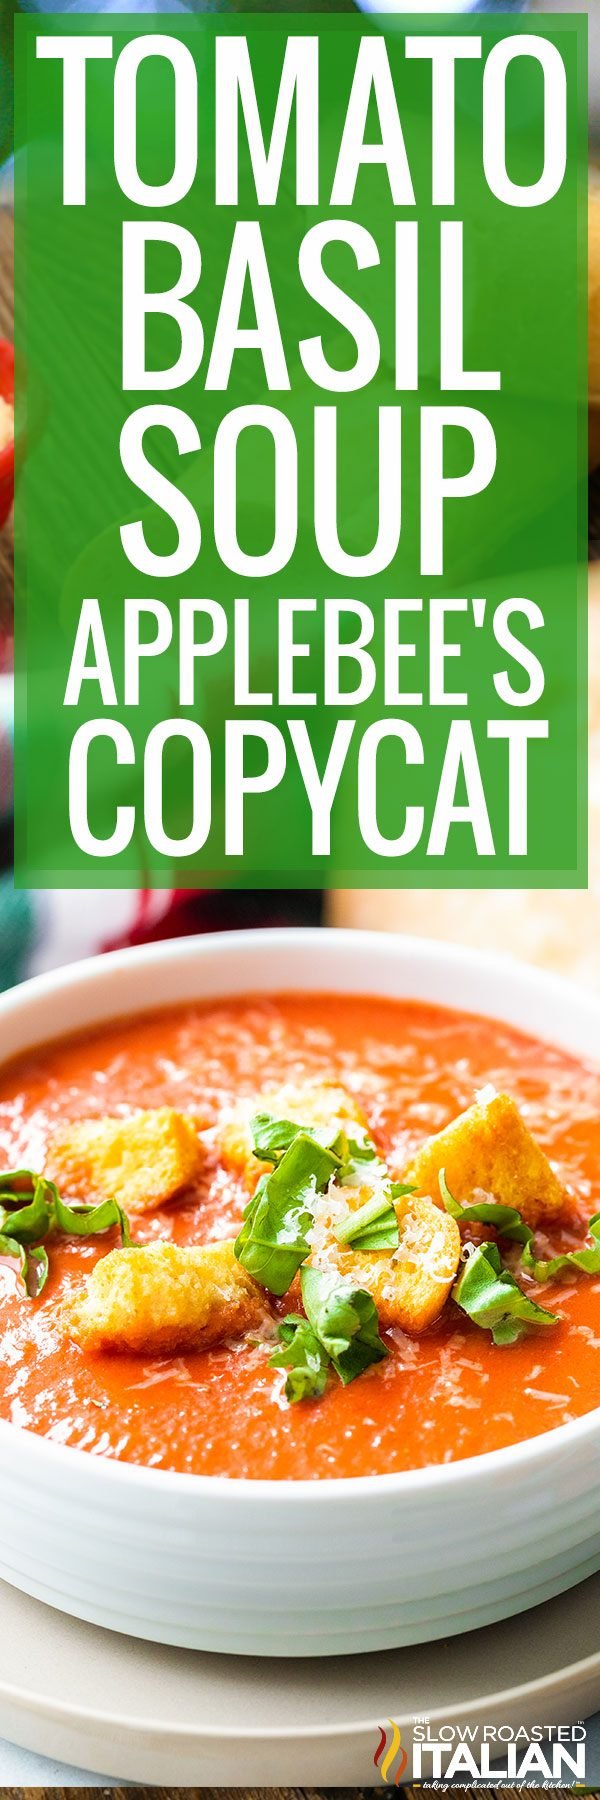 titled photo collage shows Applebee's copycat version of tomato basil soup recipe in bowls